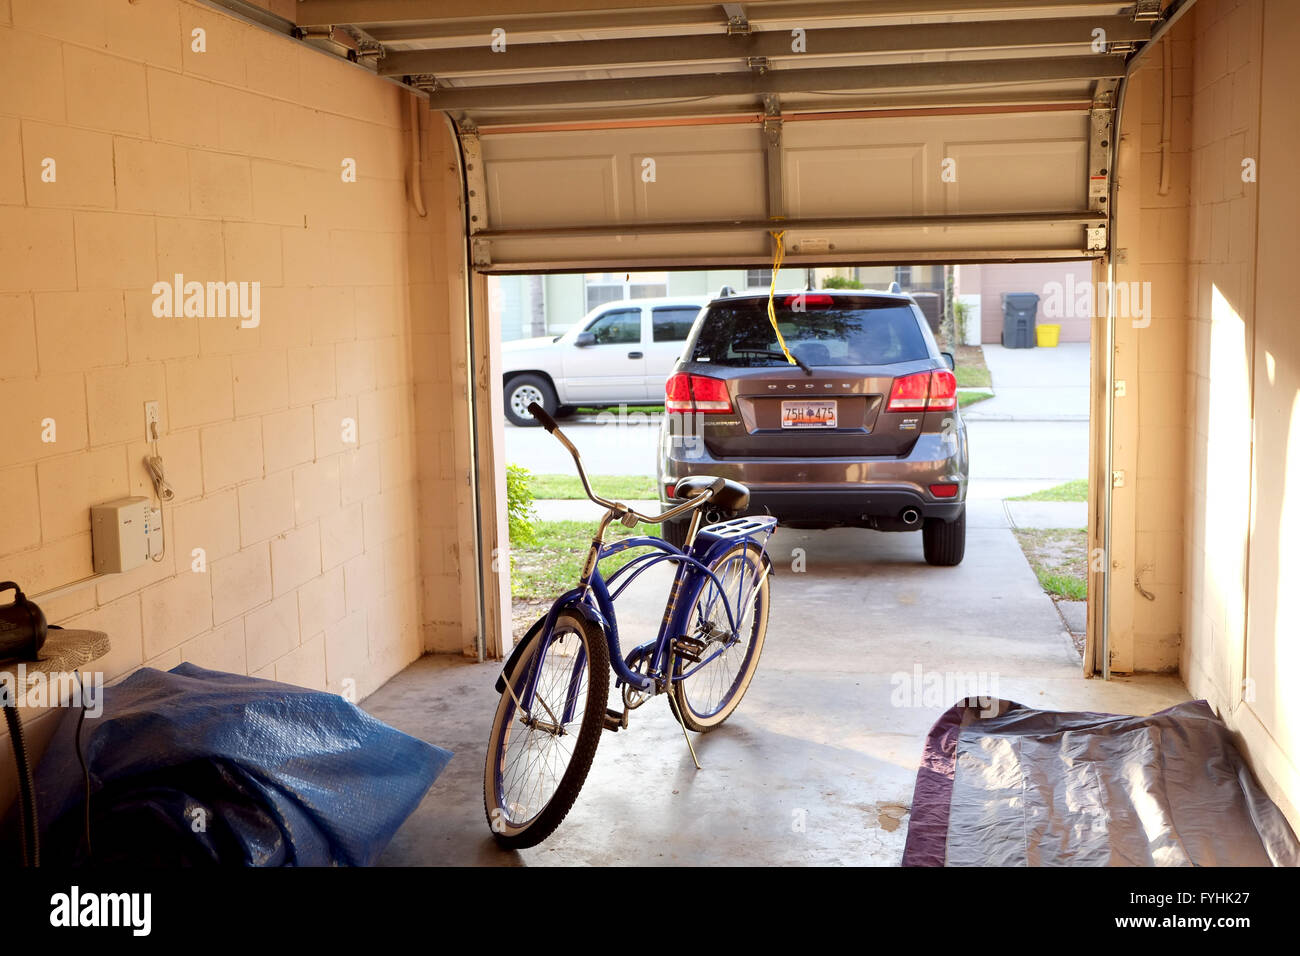 27th April 2016 view of the inside of an American home garage, looking out including a classic Schwinn cruiser bike Stock Photo